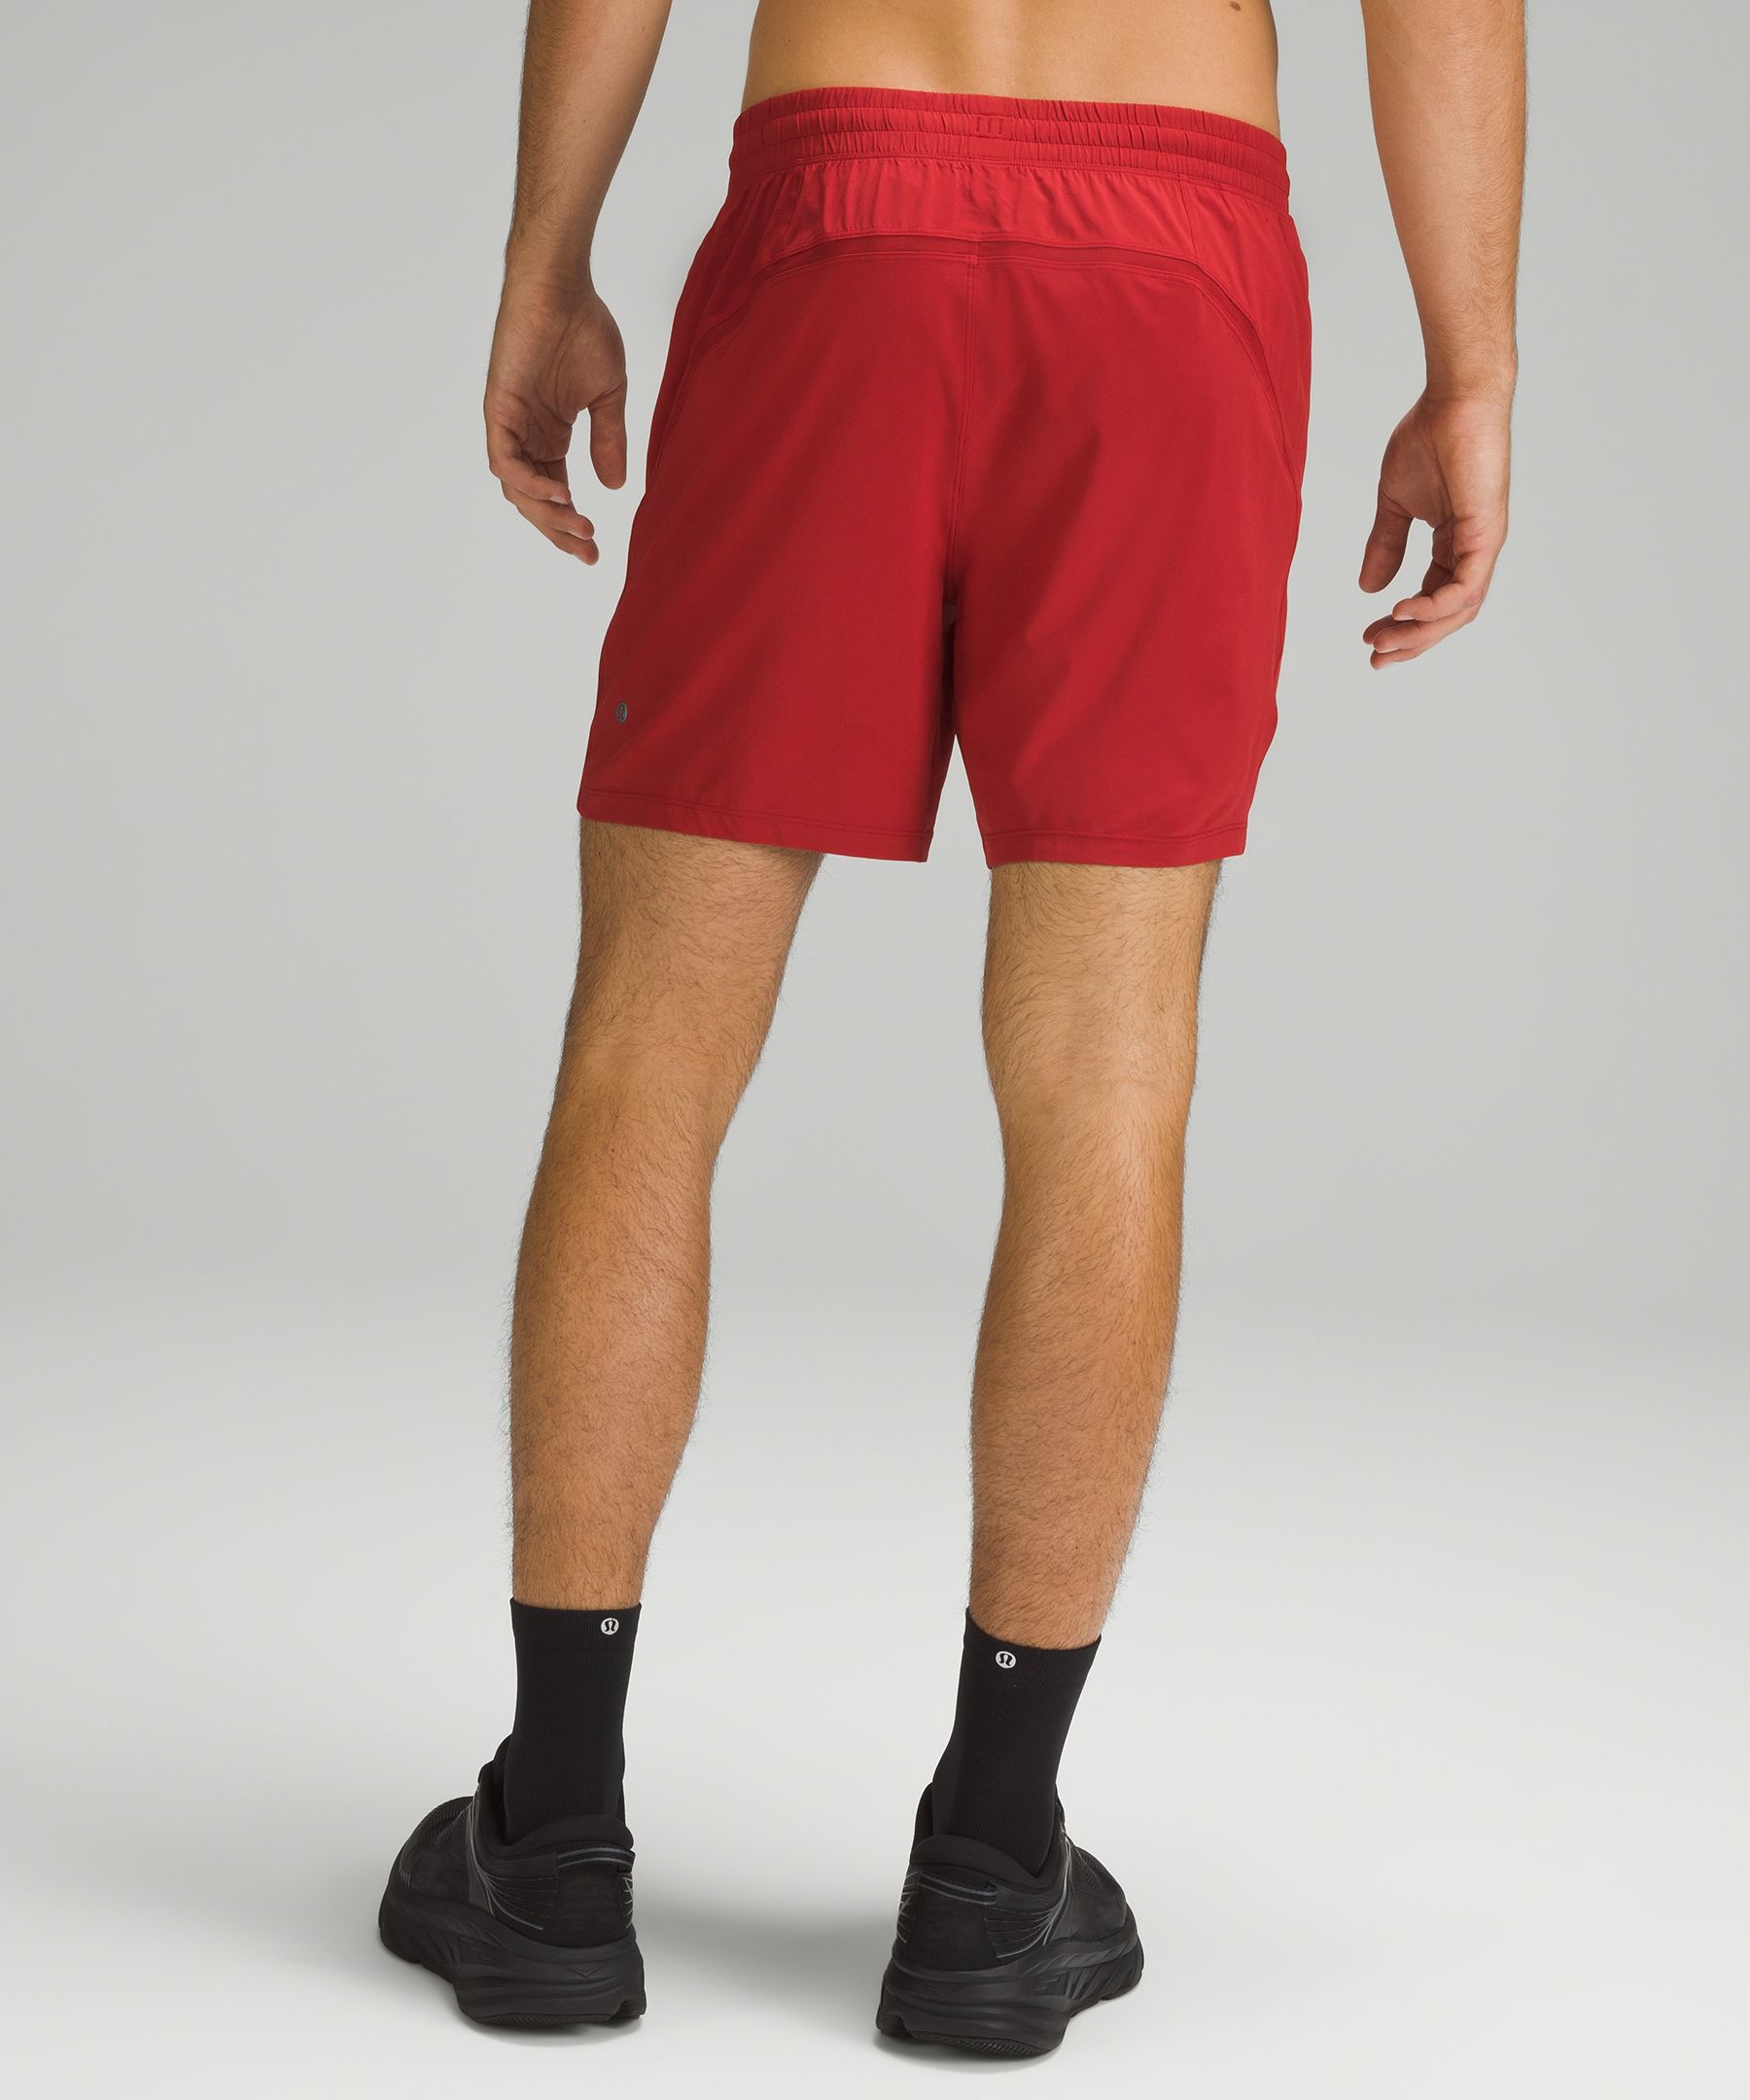 Lululemon's Pace Breaker Lined Shorts Are Up to 50% Off - Men's